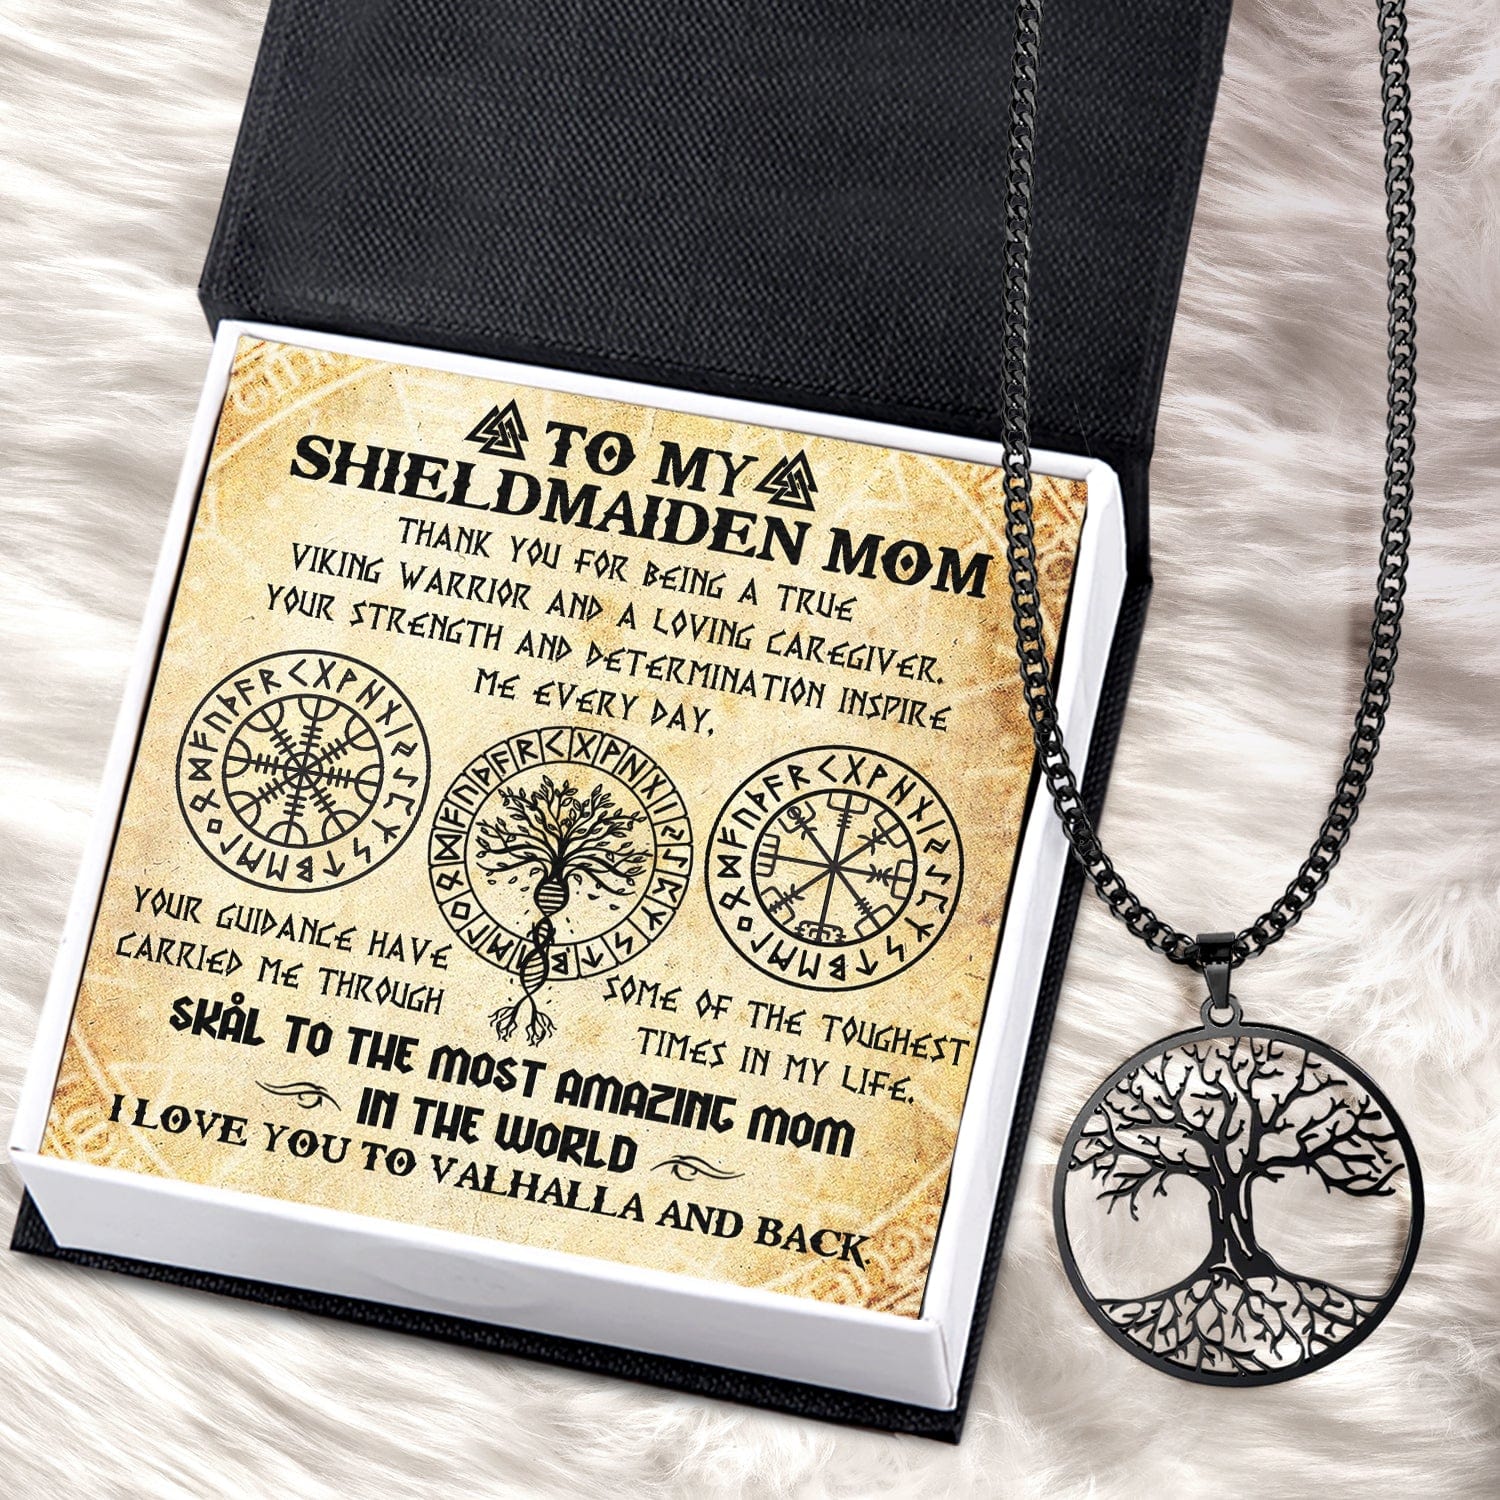 Tree Of Life Necklace - Viking - To My Shieldmaiden Mom - I Love You To Valhalla And Back - Gnyb19002